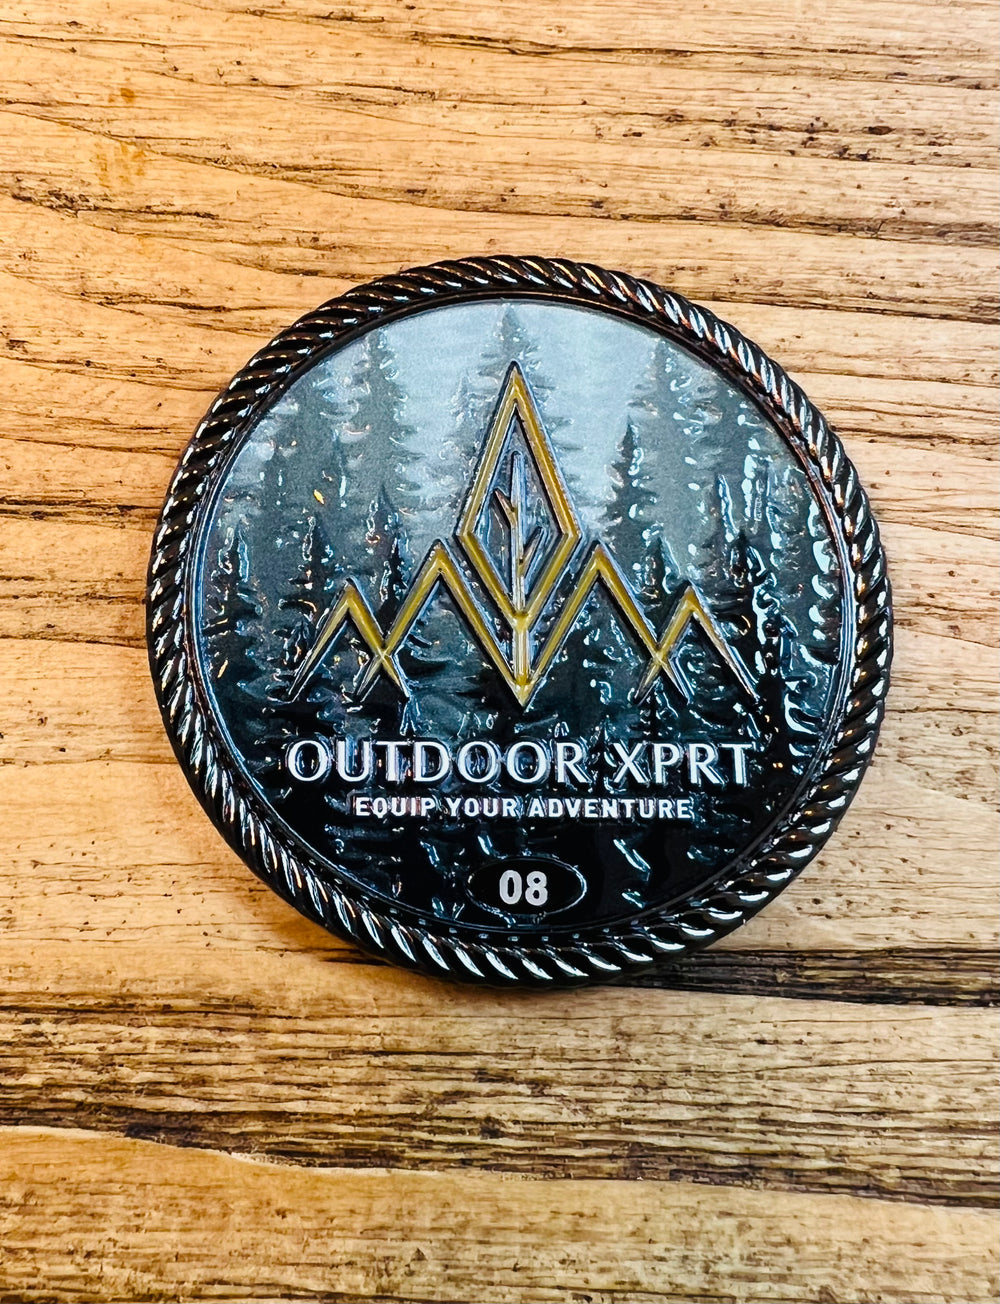 Outdoor XPRT Club Coin | S4 Supplies